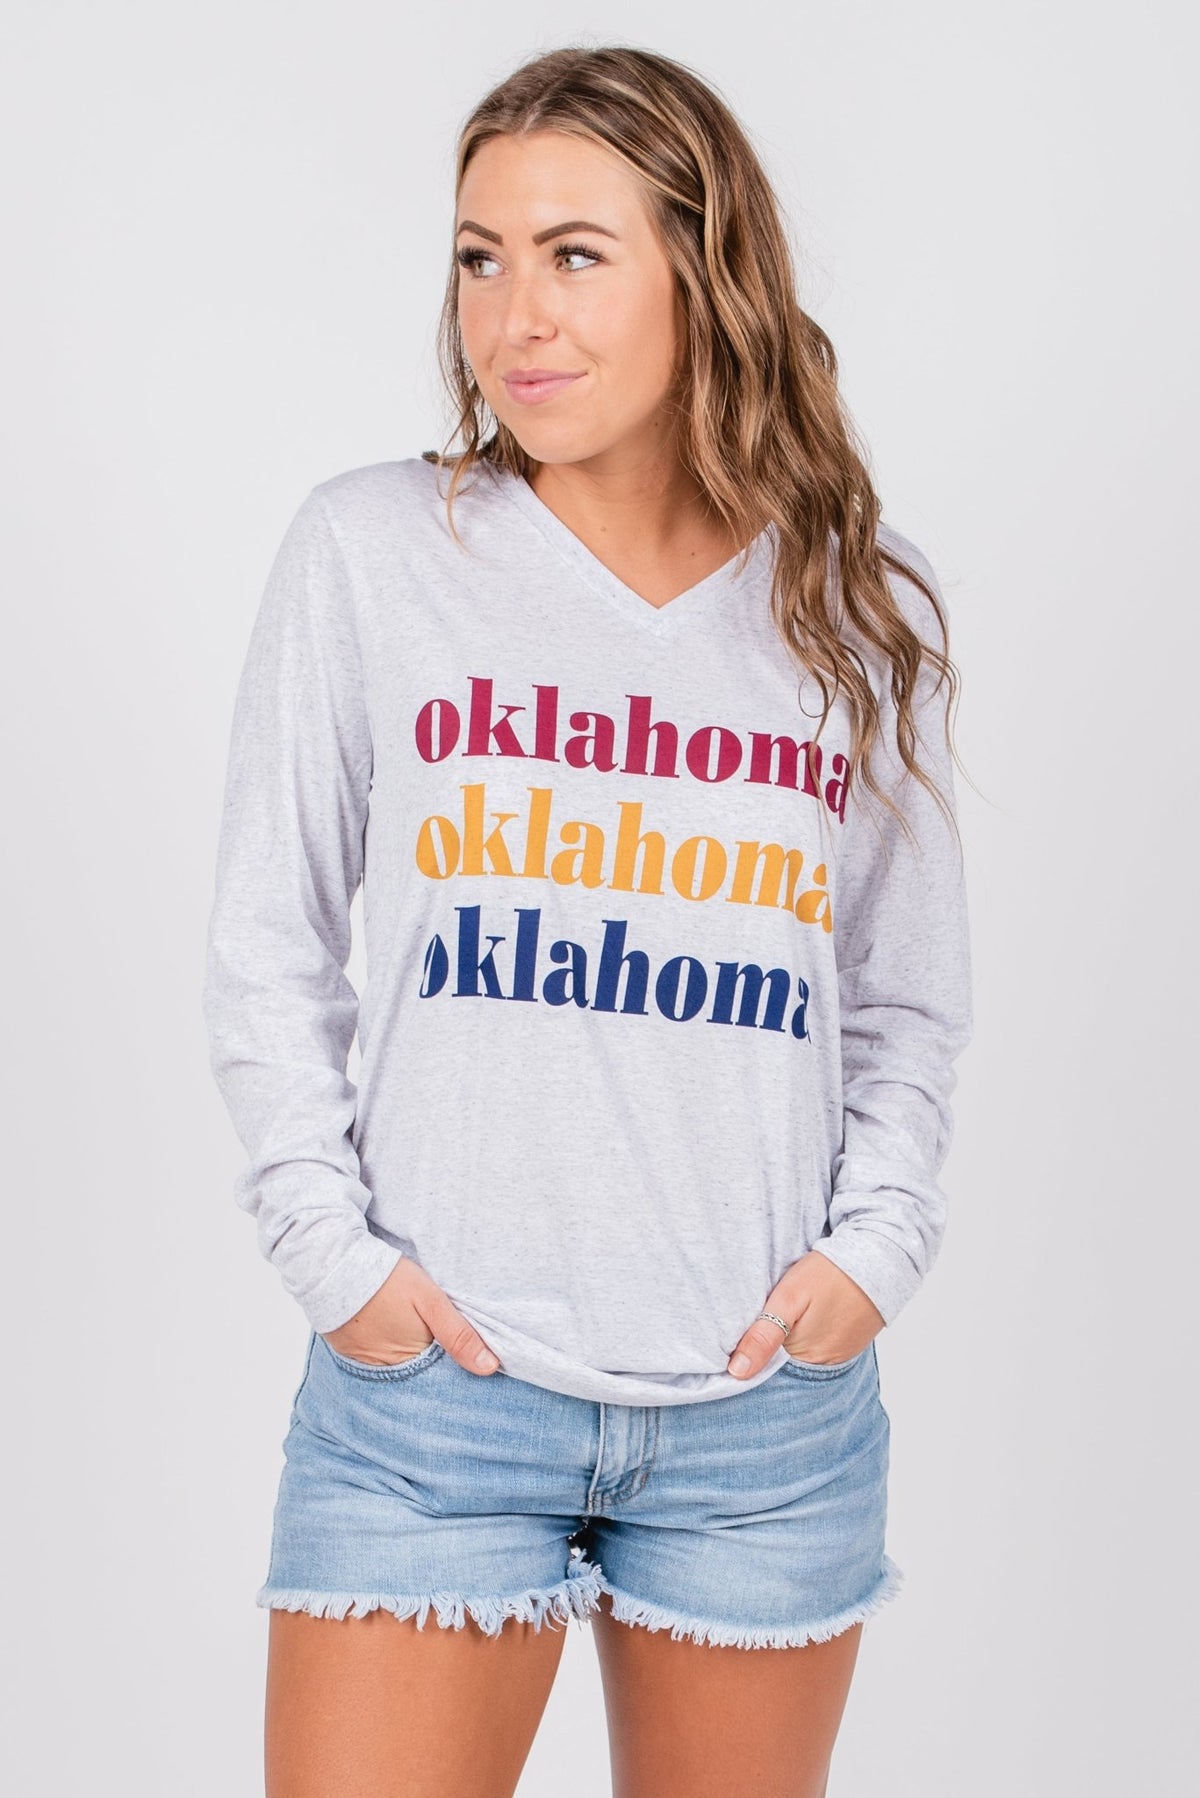 Oklahoma repeater unisex long sleeve v-neck t-shirt - Cute T-shirts - Trendy Graphic T-Shirts at Lush Fashion Lounge Boutique in Oklahoma City